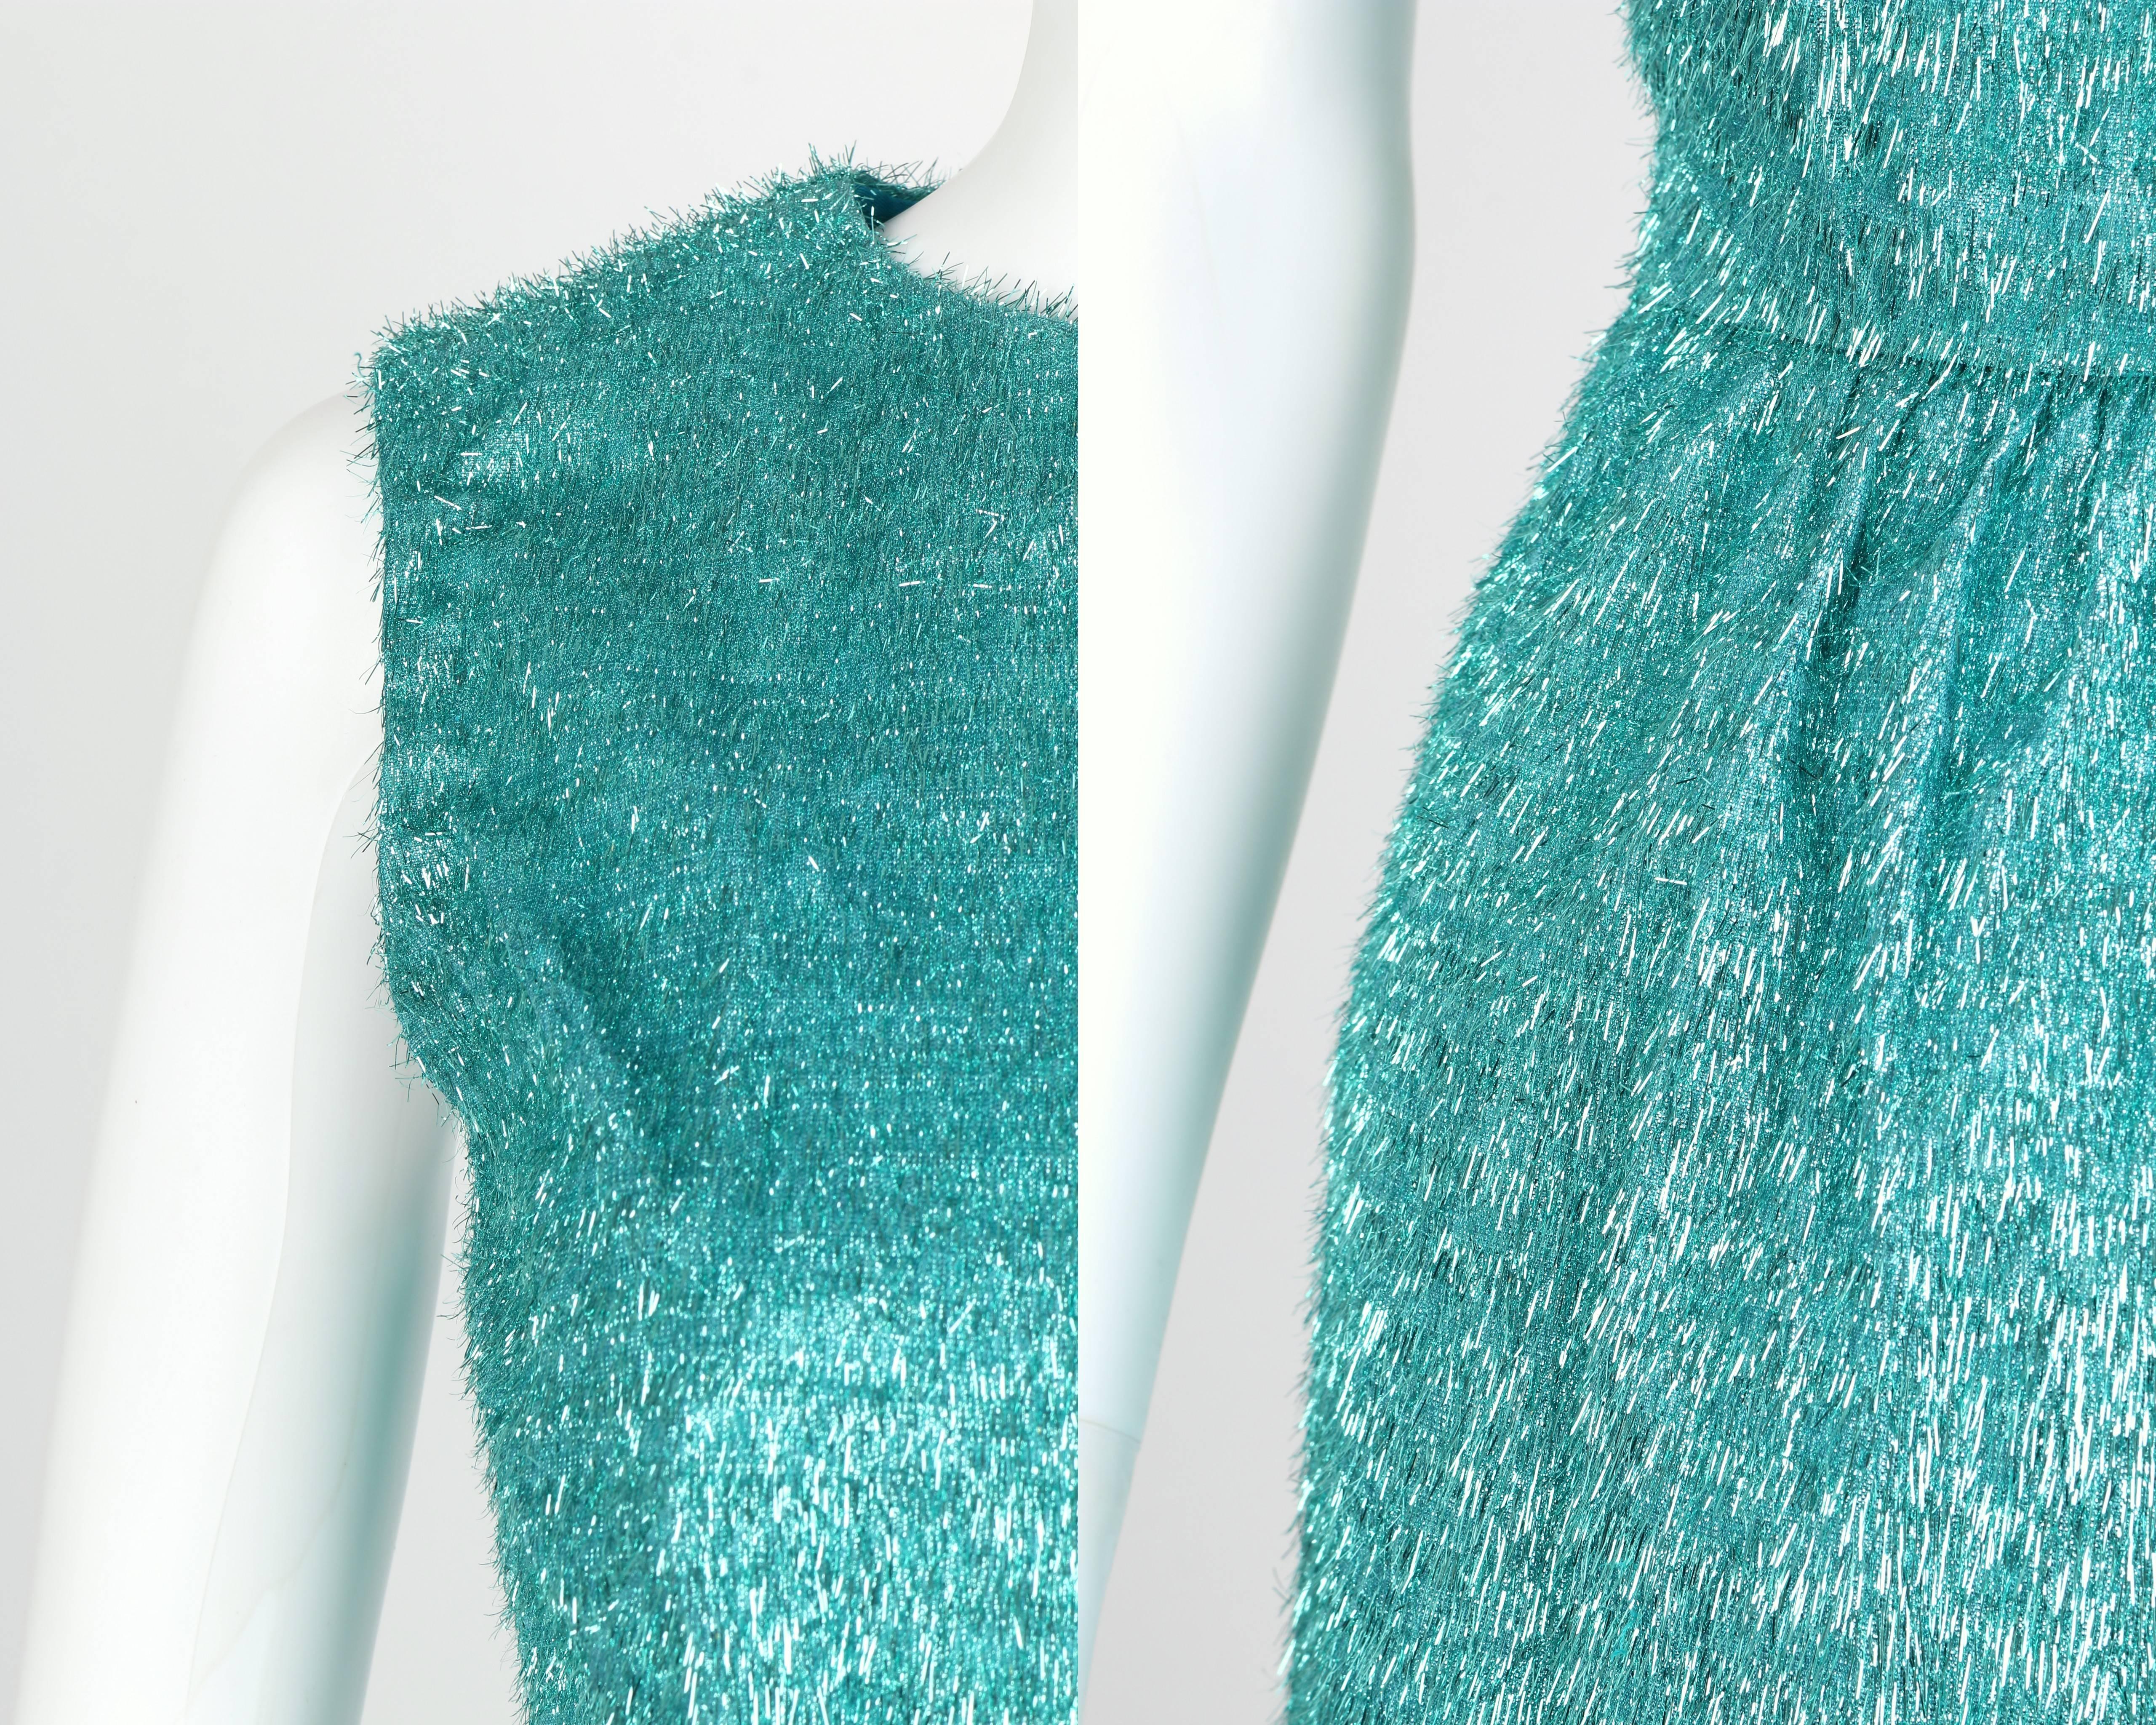 Women's COUTURE c.1960's Turquoise Blue Metallic Tinsel Cocktail Party Shift Dress For Sale